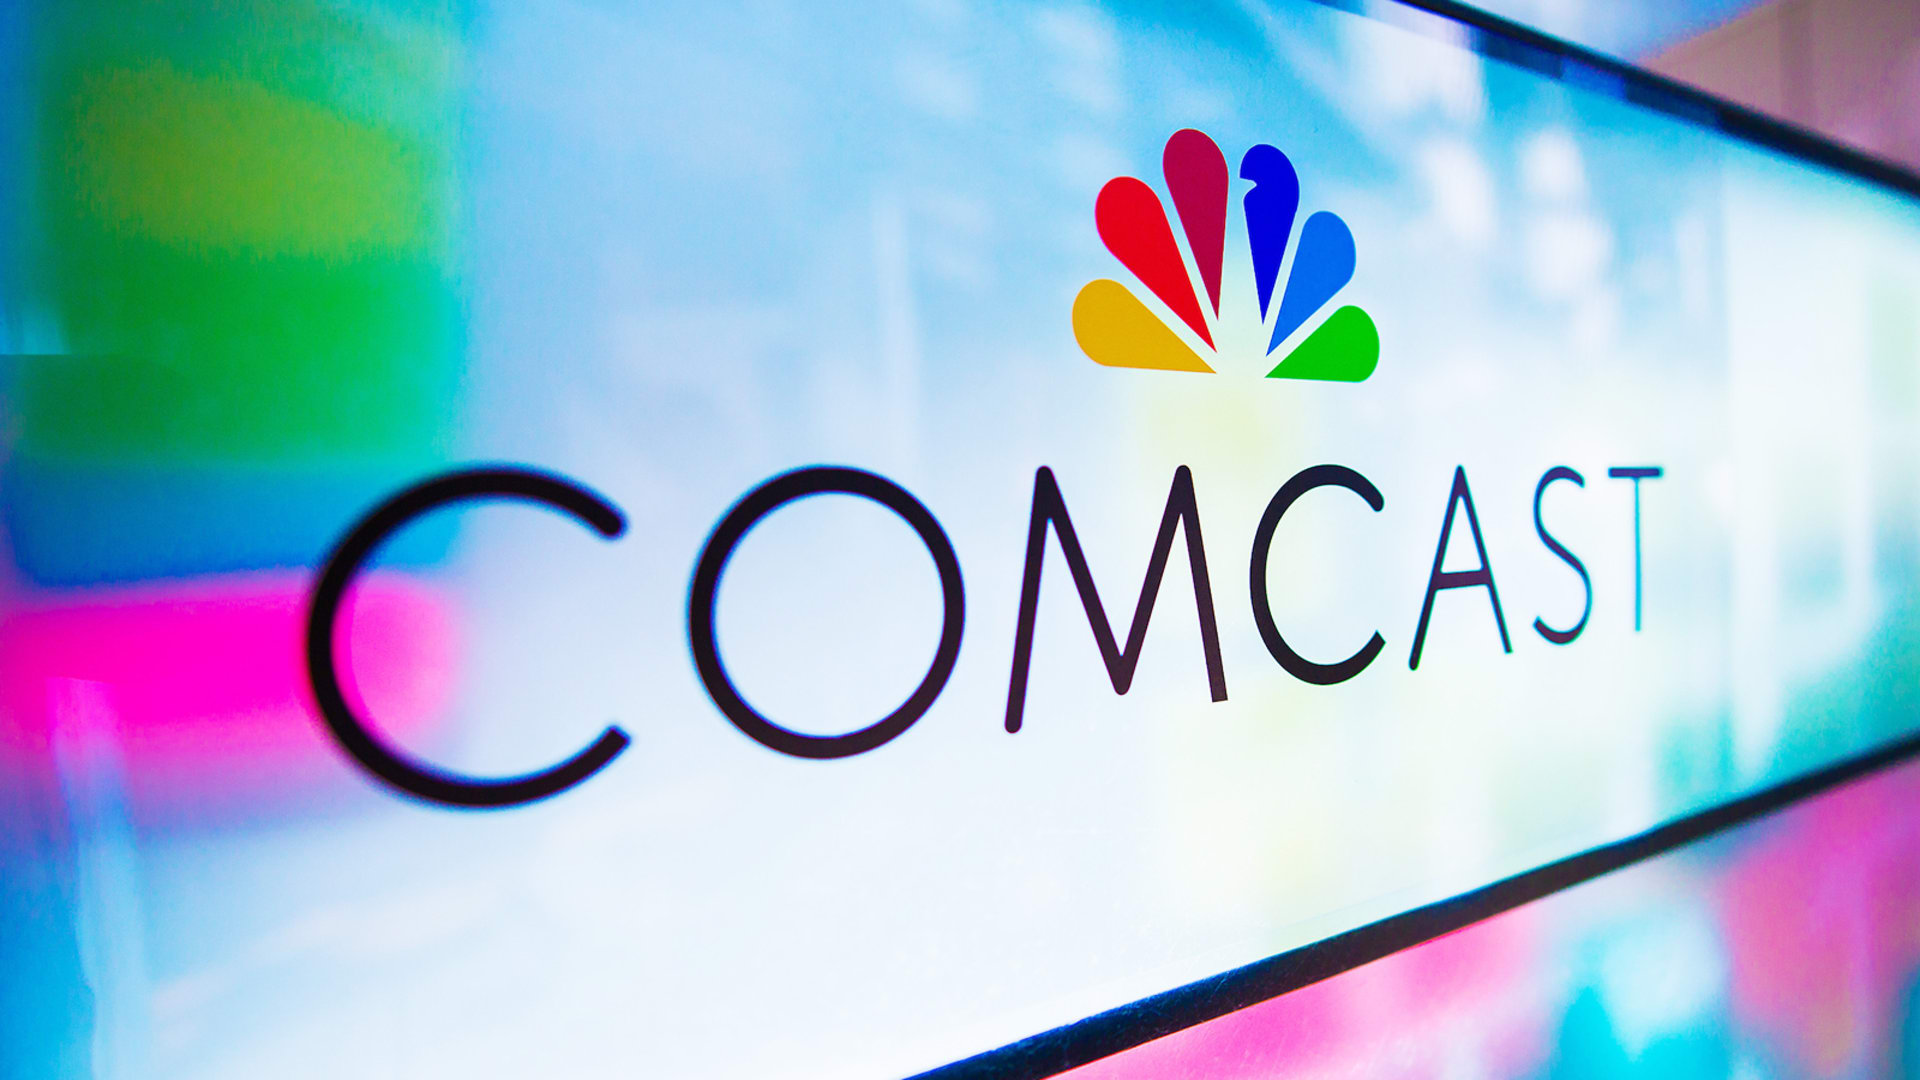 Former Comcast employees say sexual harassment is rampant